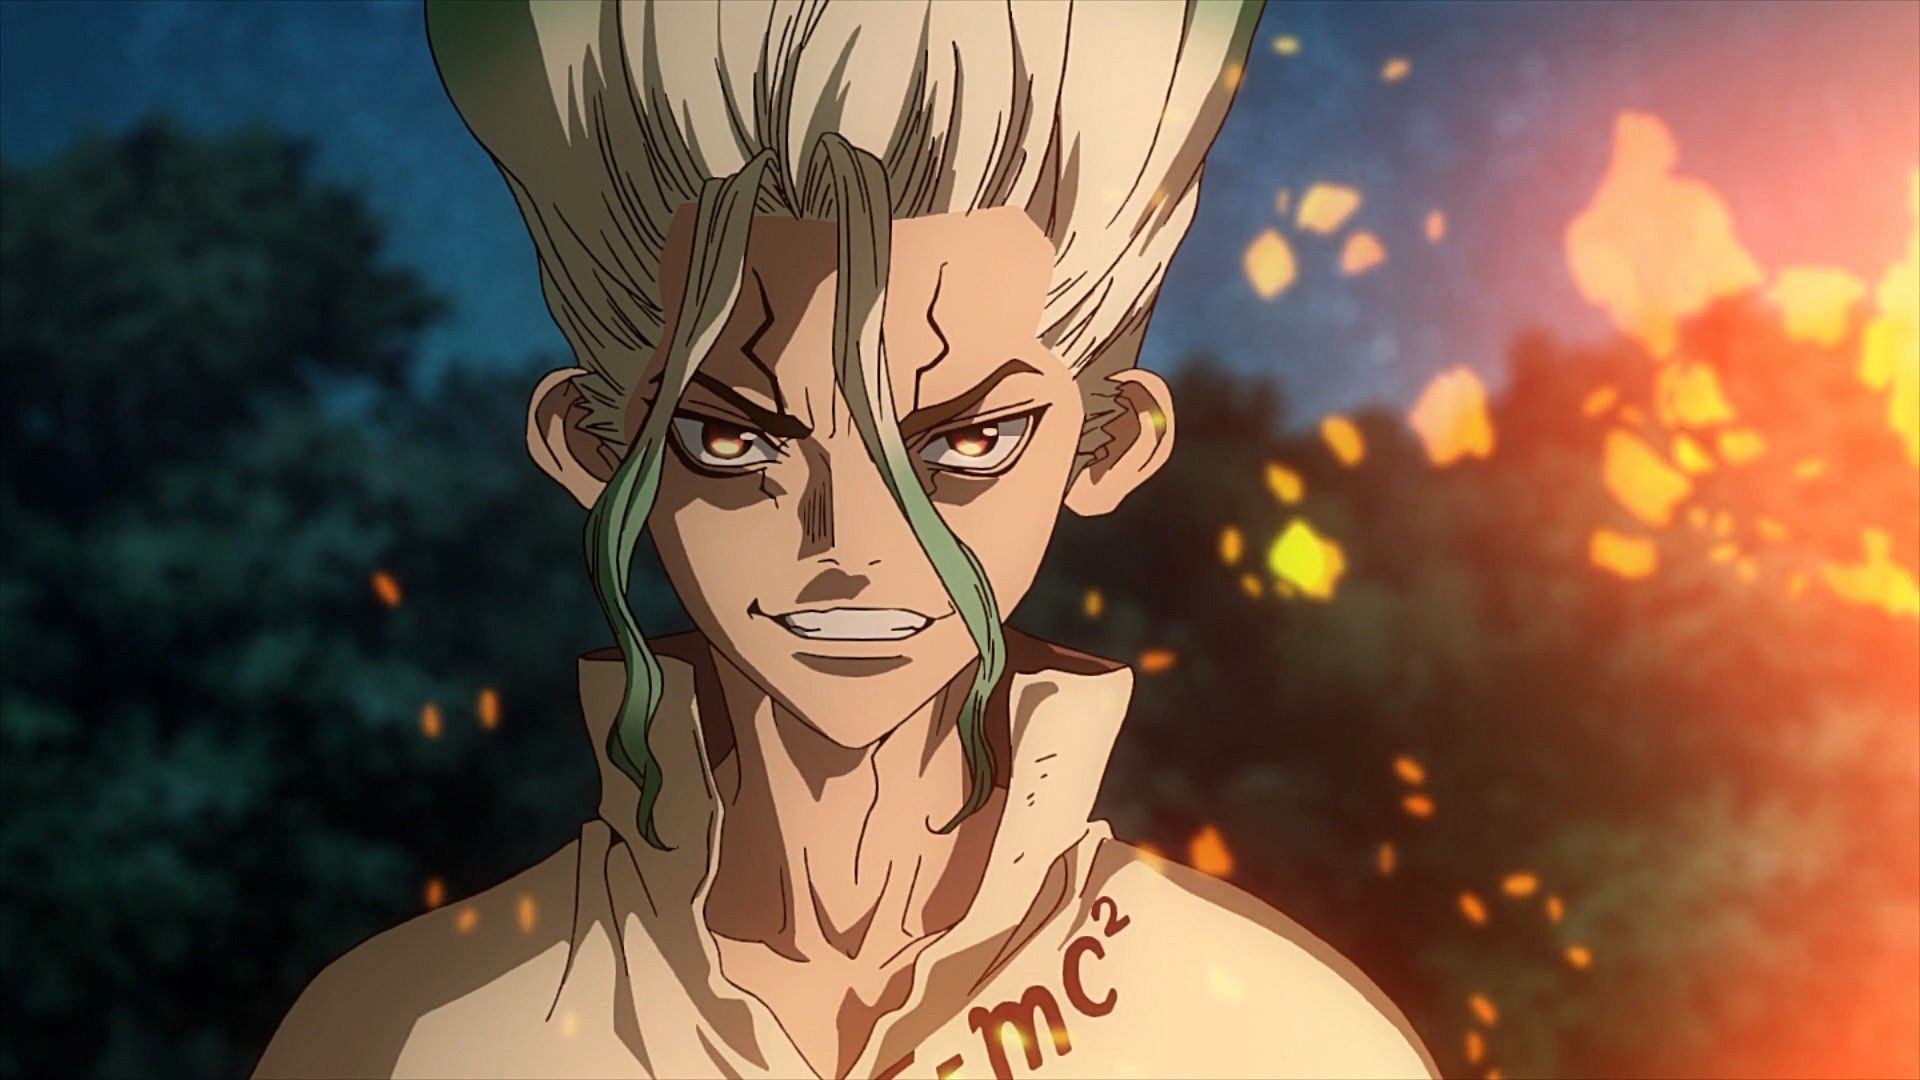 Dr. Stone Season 2: Official Release Date! New Promo, Key Visual & Spoilers!